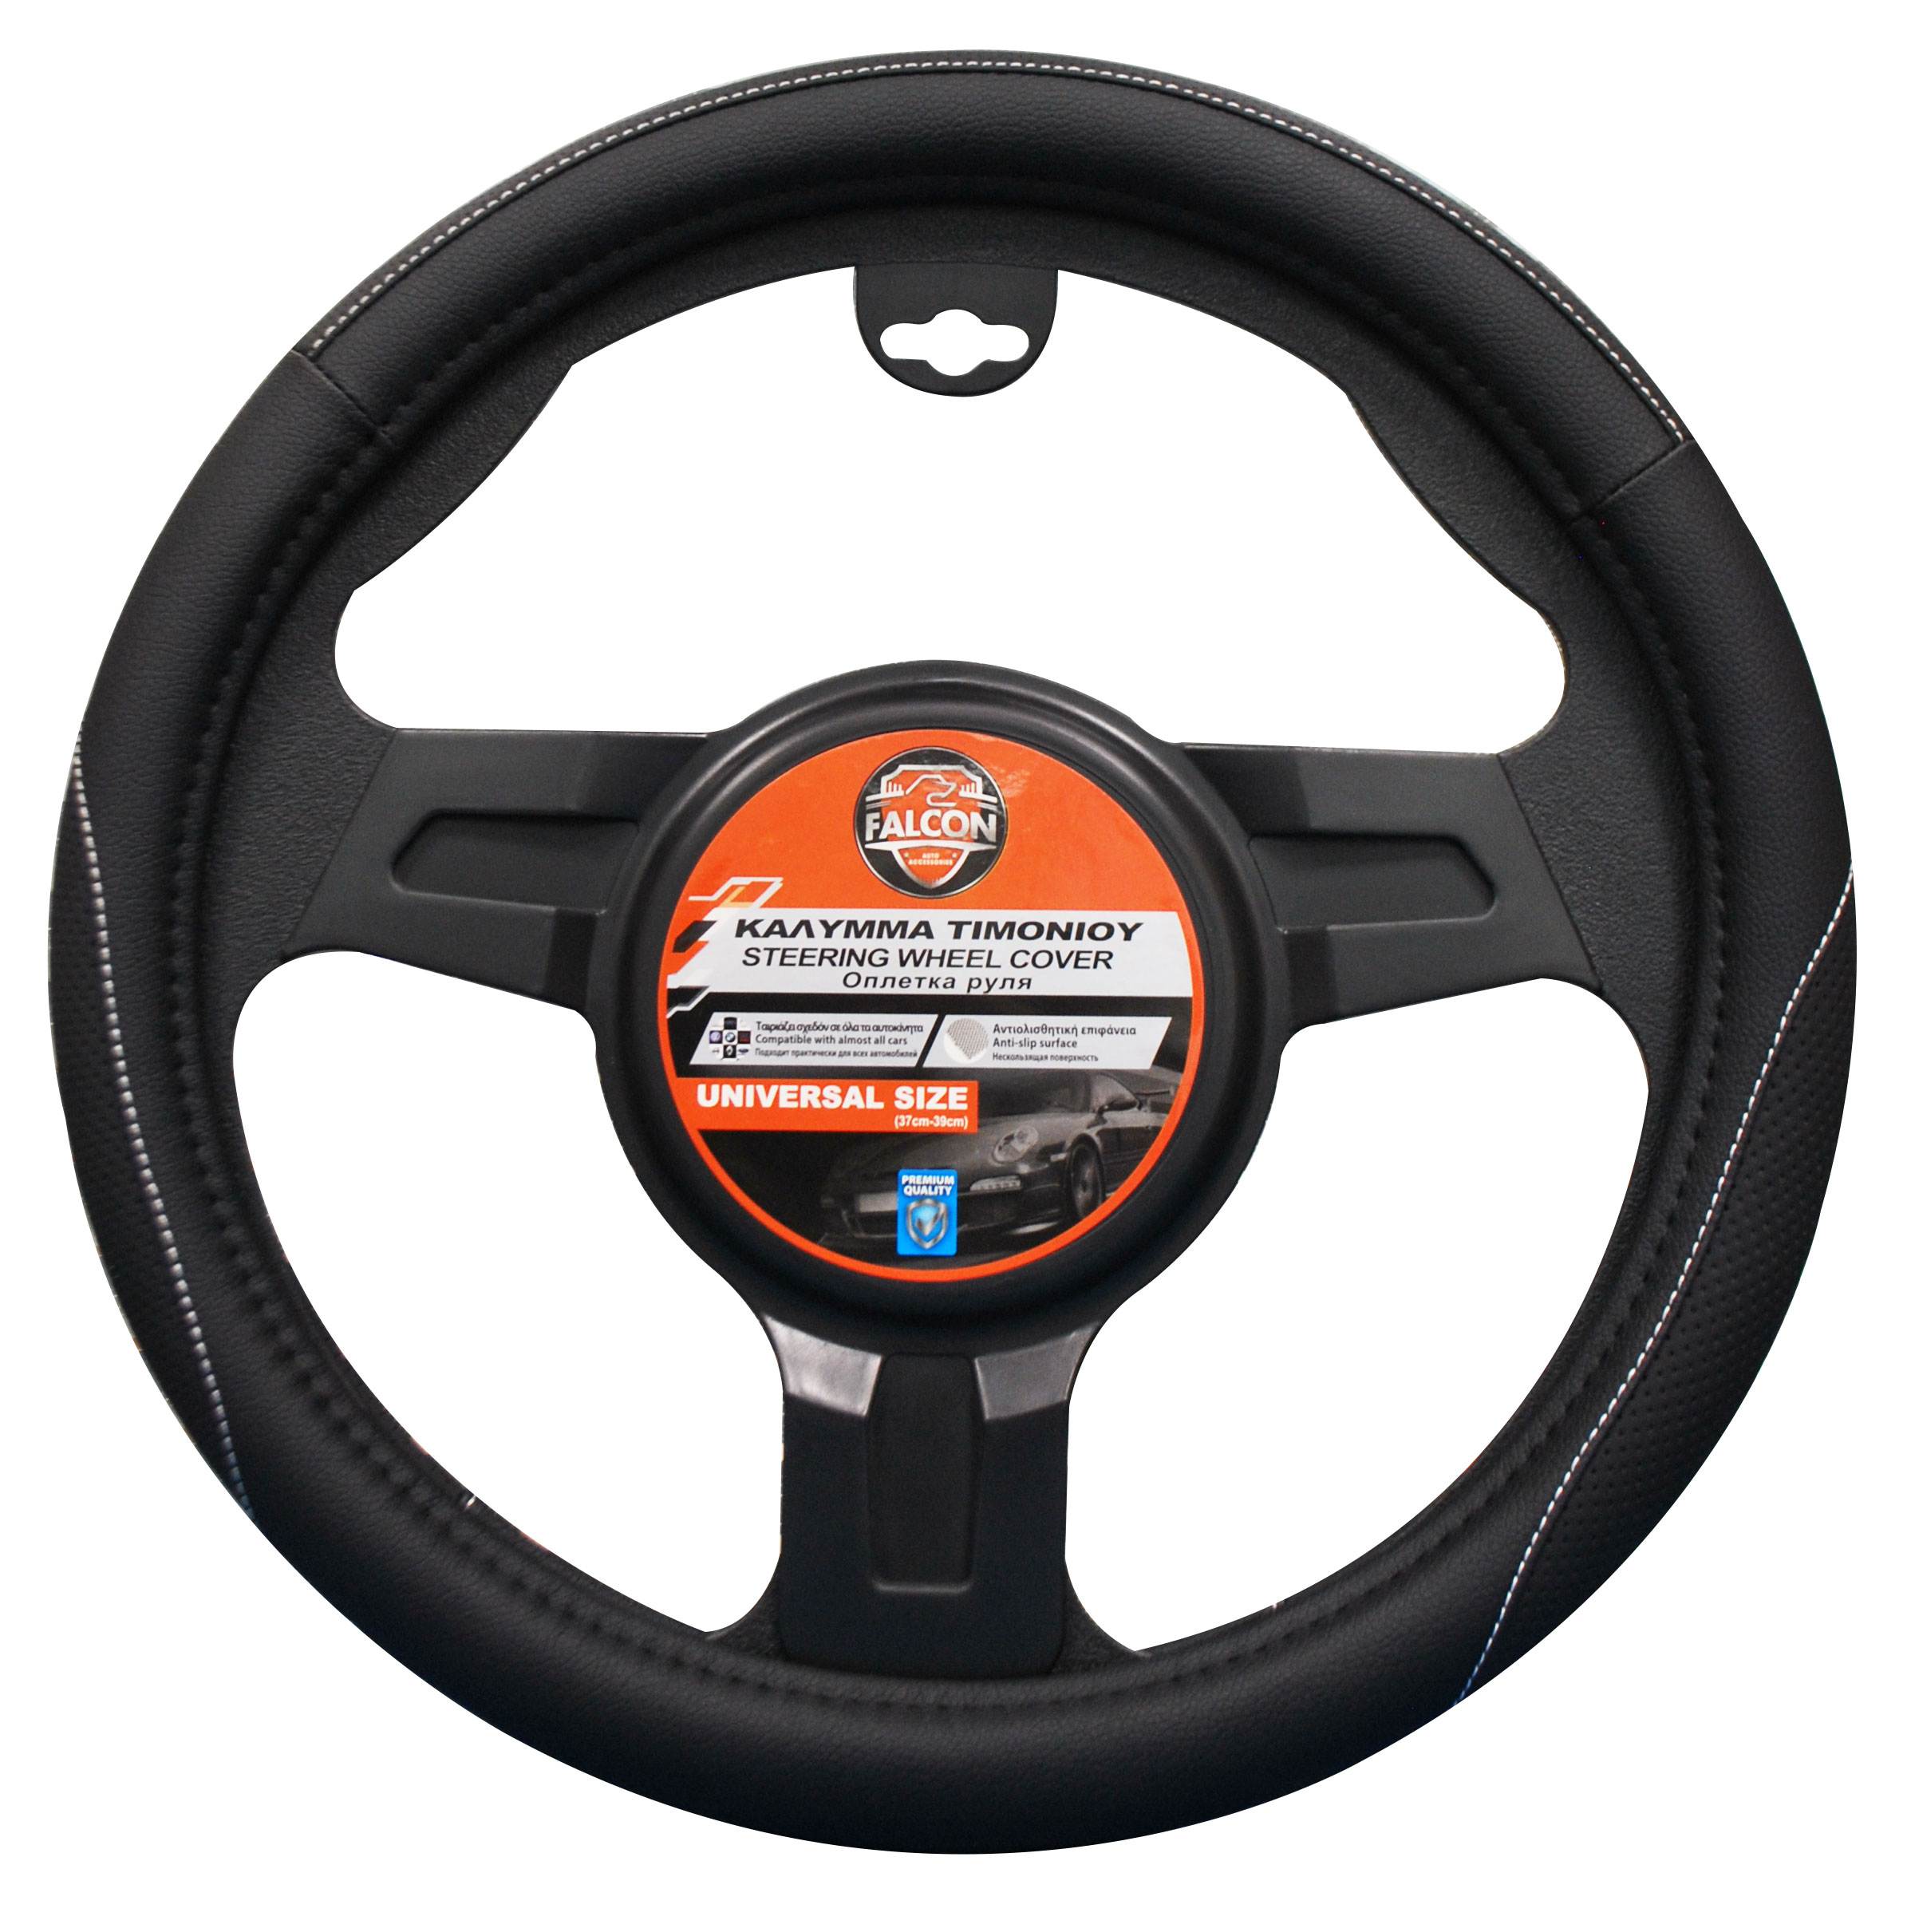 FALCON STEERING WHEEL COVER BLACK / WHITE STITCHING